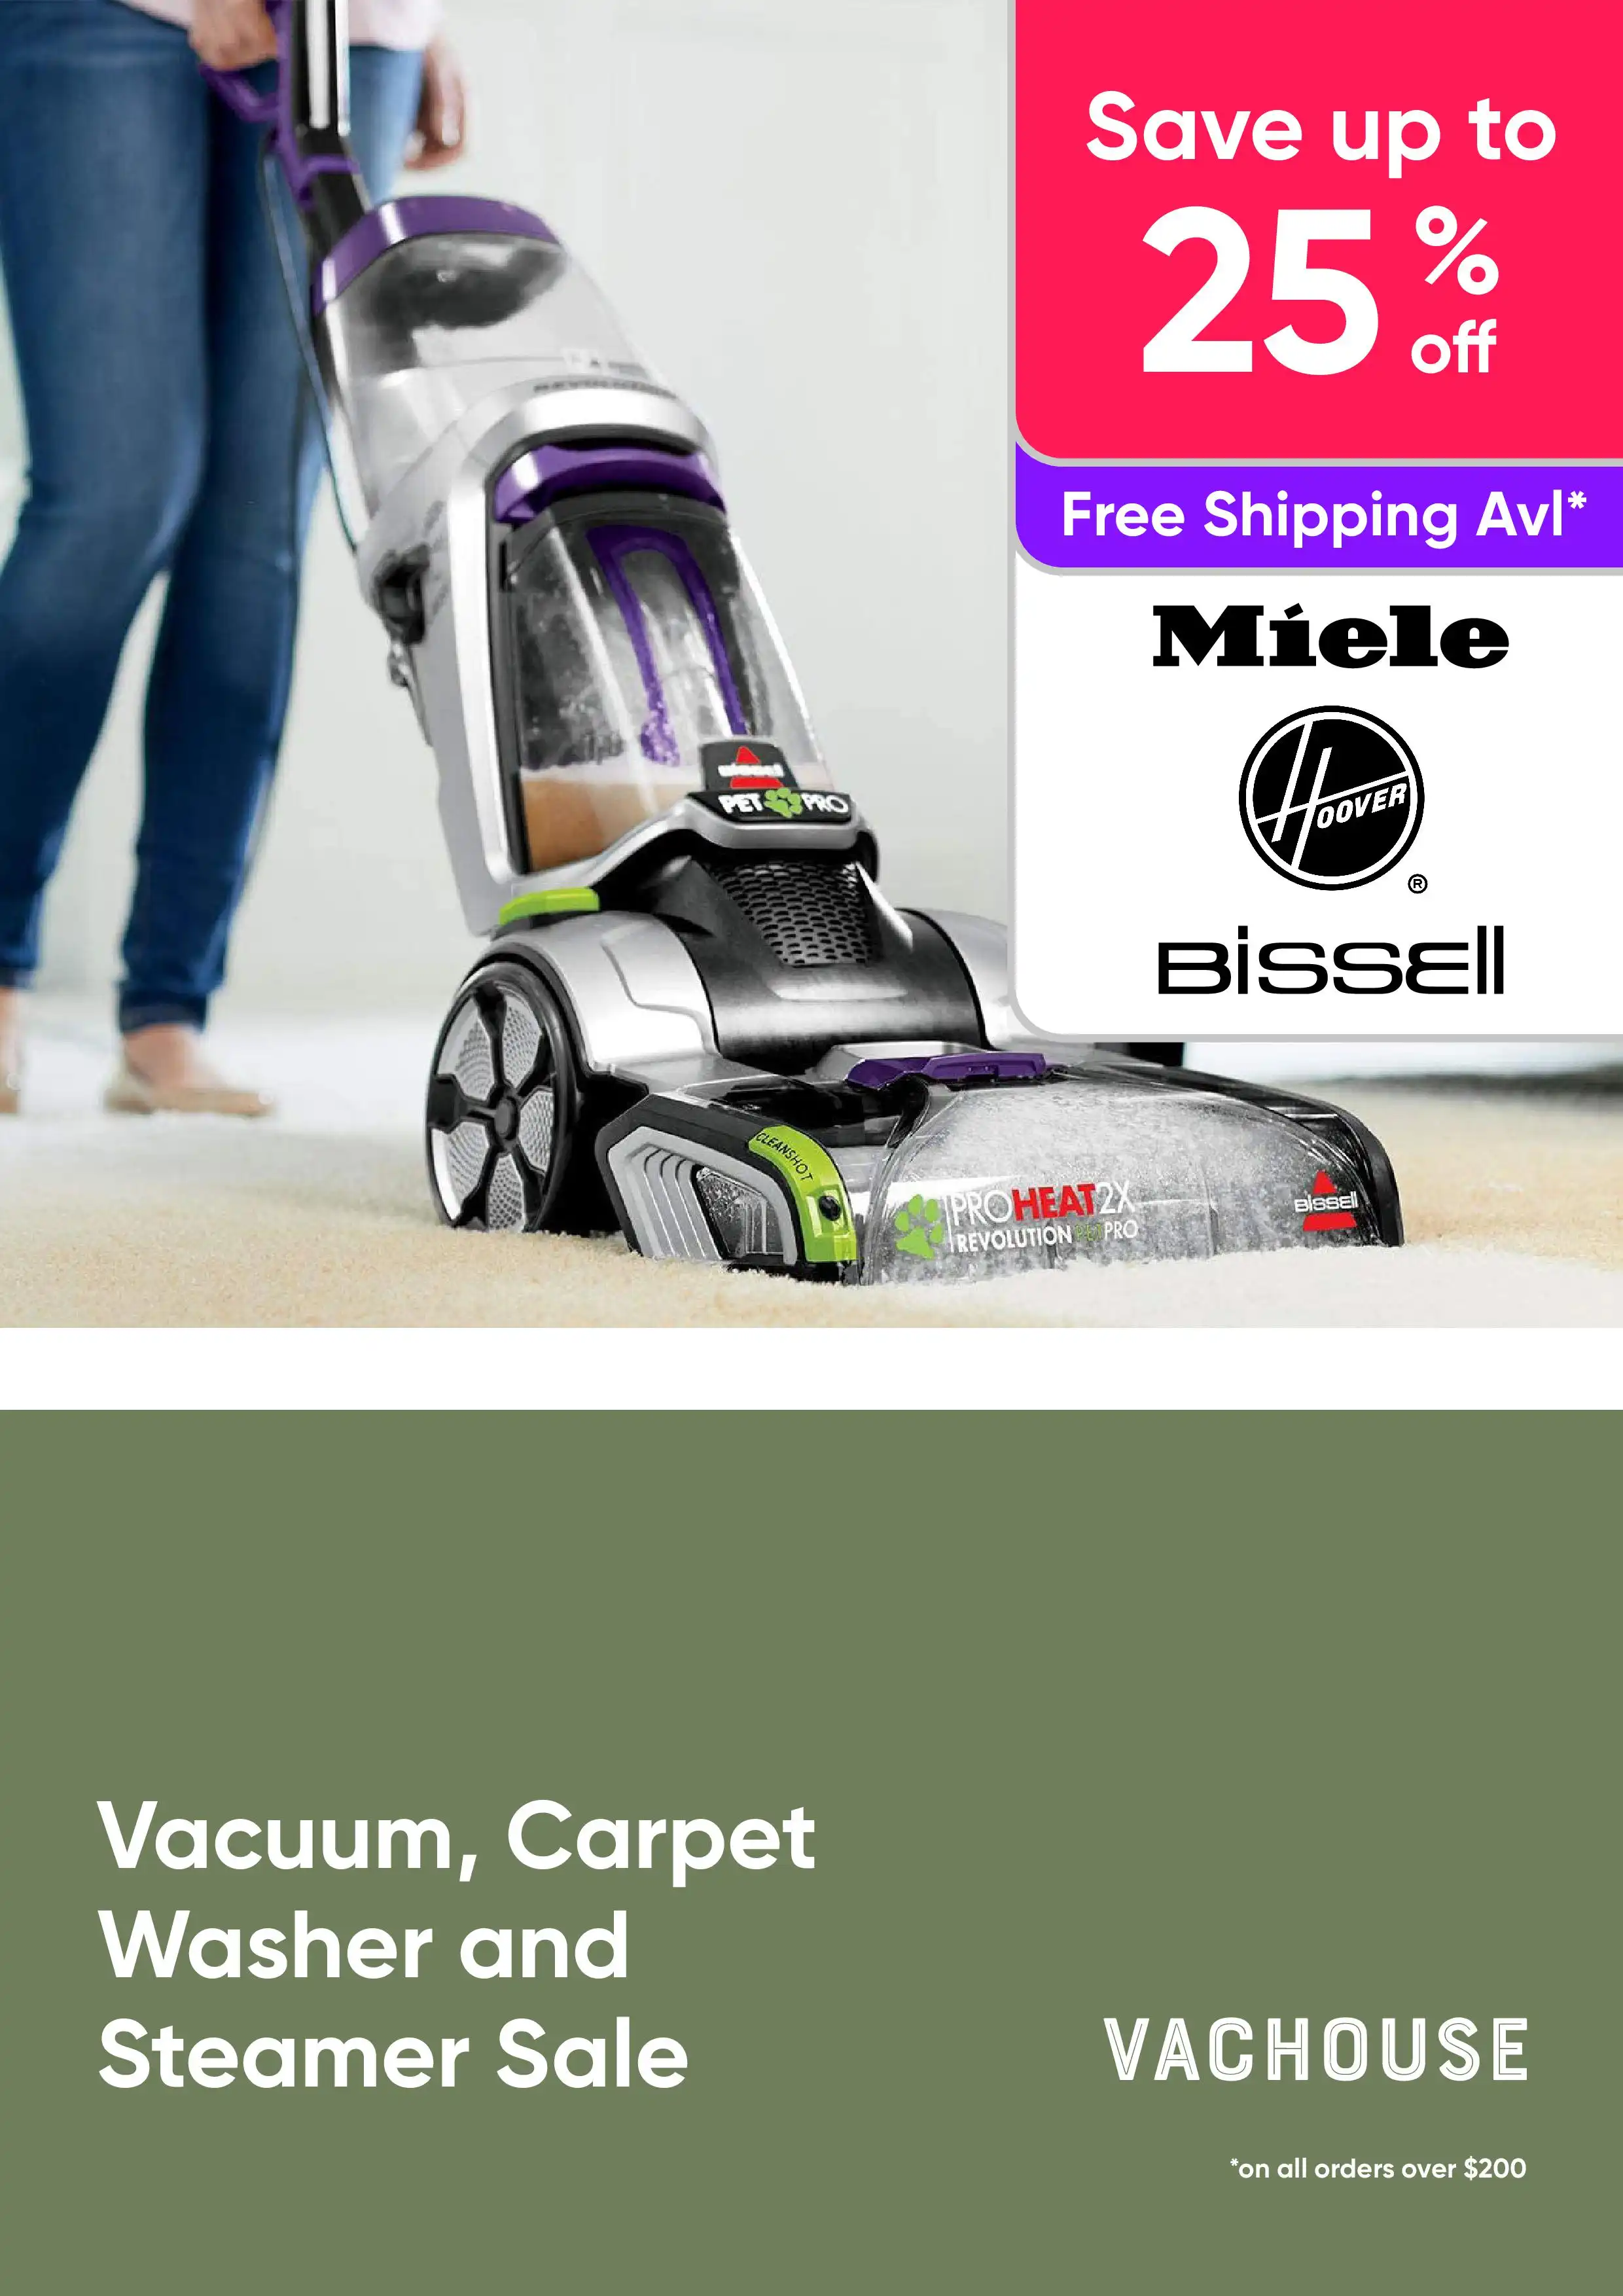 Vacuum, Carpet Washer and Steamer Sale - Miele, Hoover and Bissell - up to 25% off